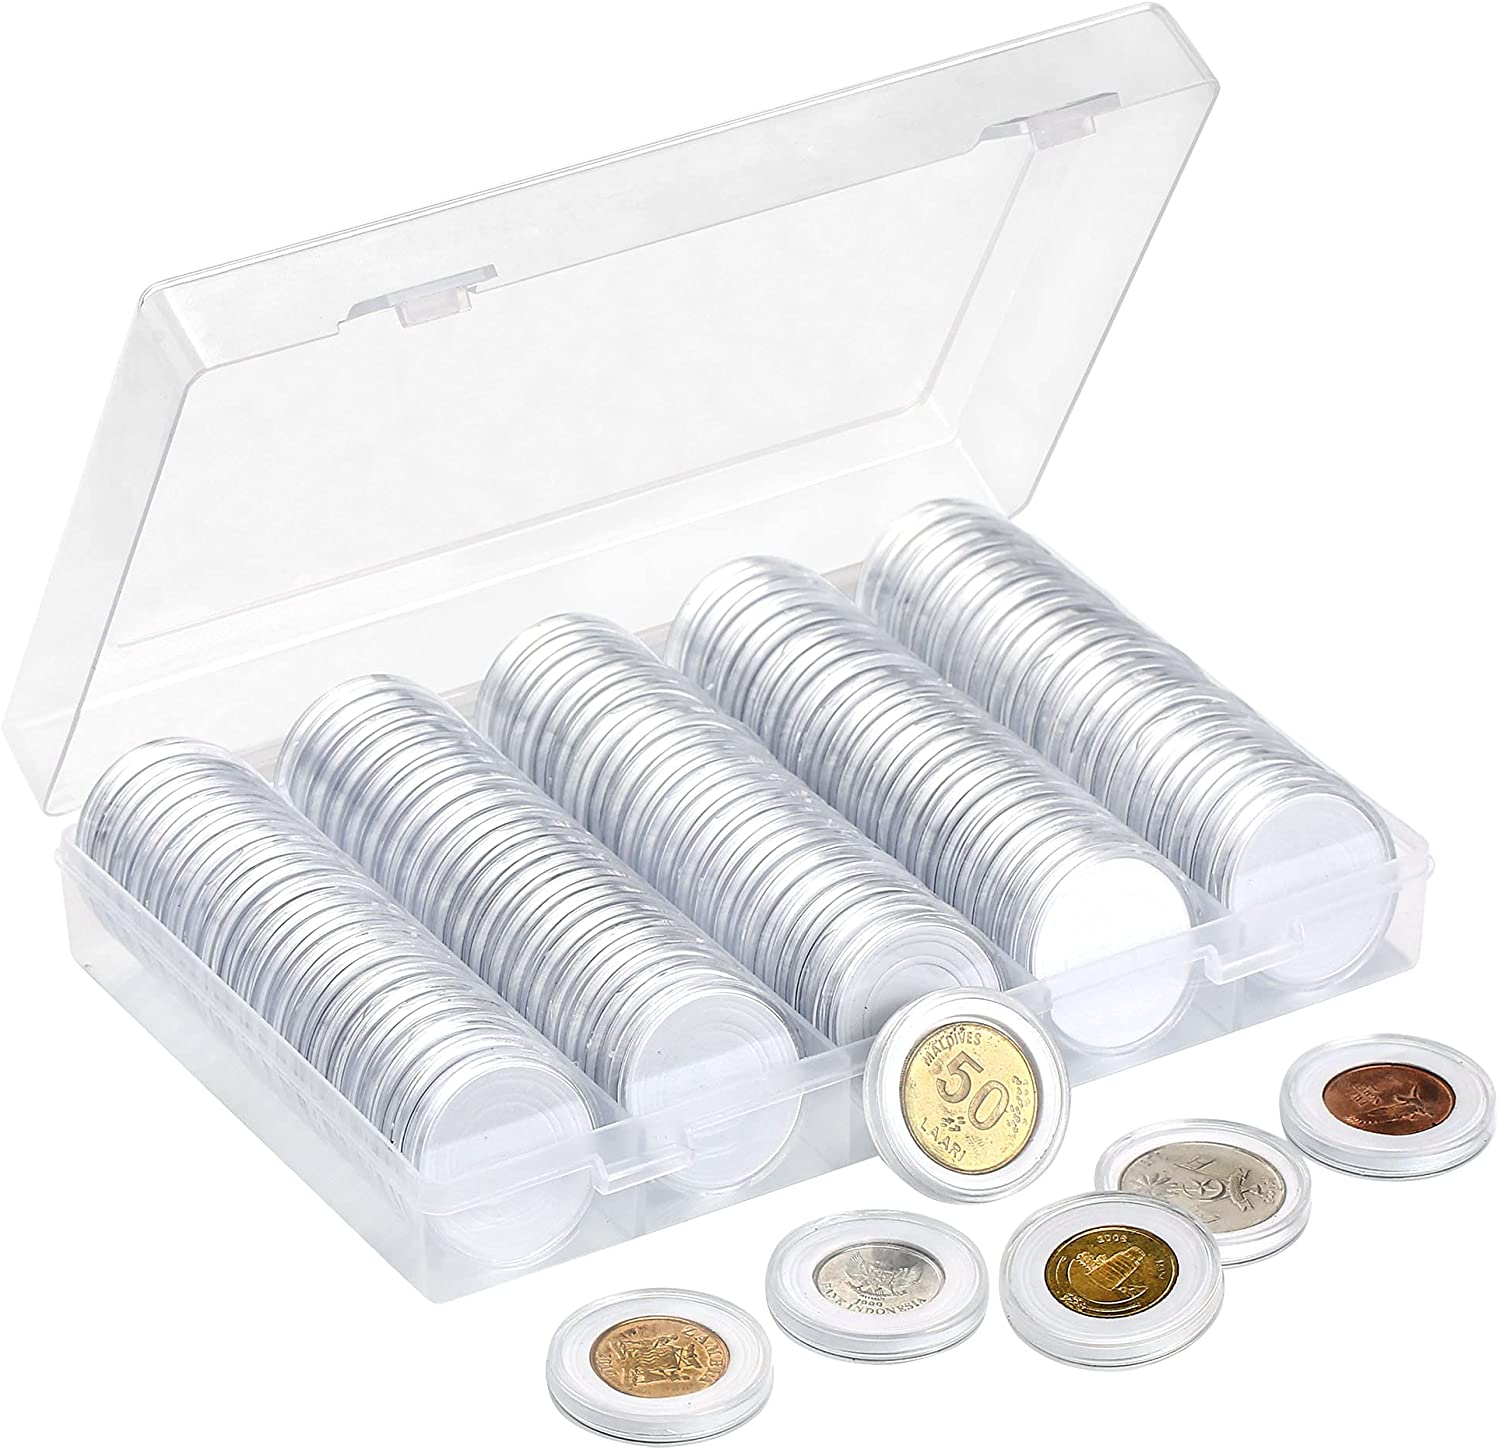 Milue Plastic Coin Capsule Holder Collection Storage Case PENNY DIMES NICKELS QUARTERS 30mm 